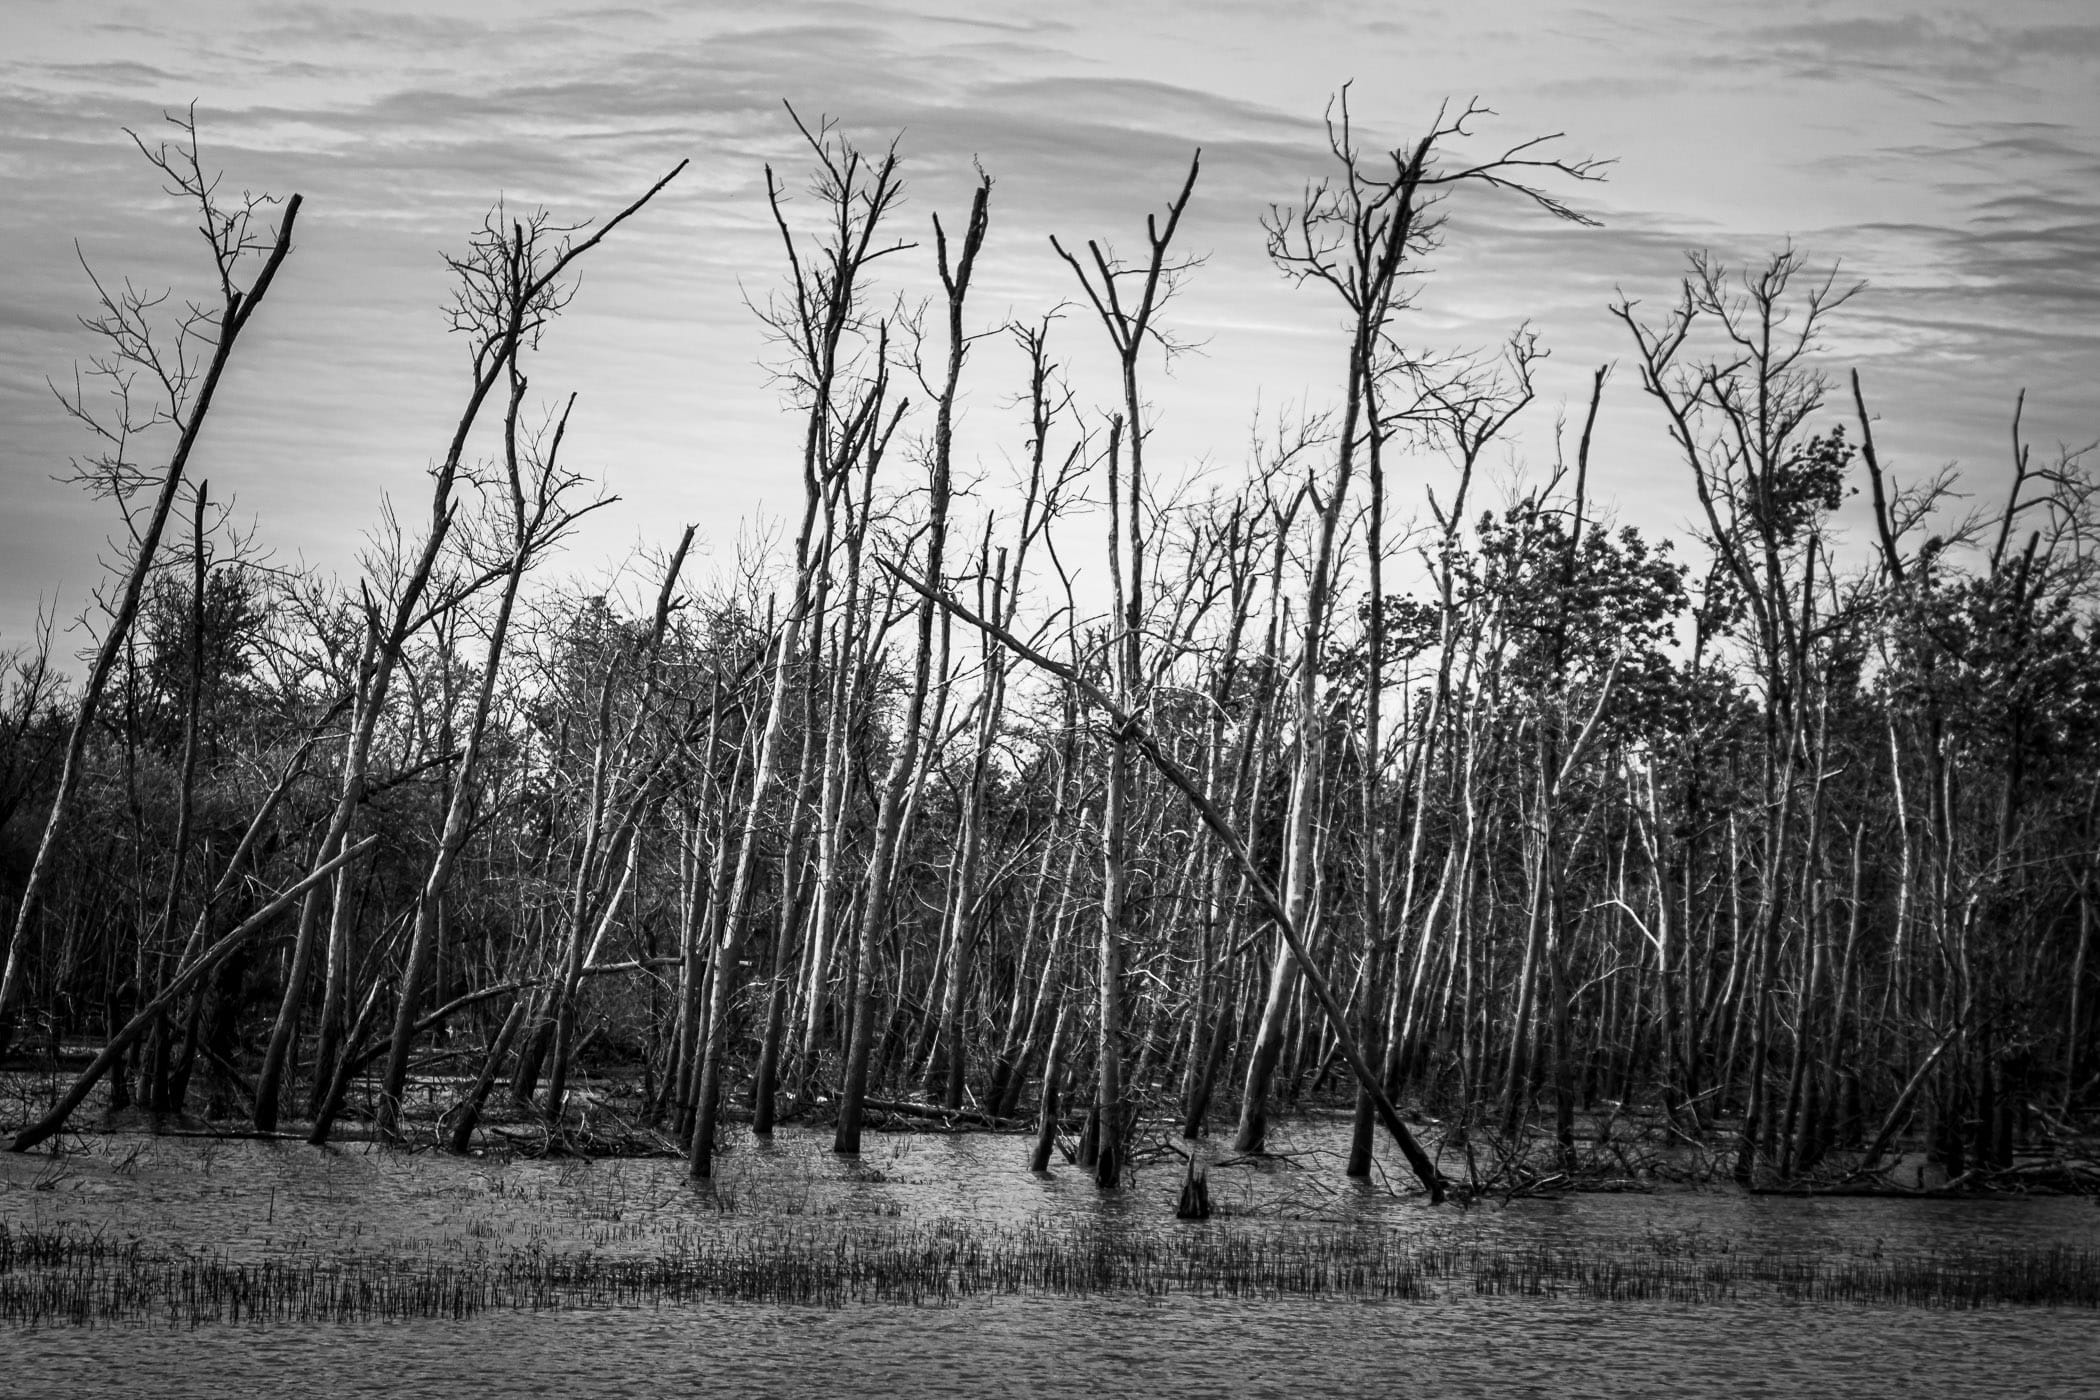 Trees stripped of their leaves rise from the marsh at Texas' Hagerman National Wildlife Refuge.